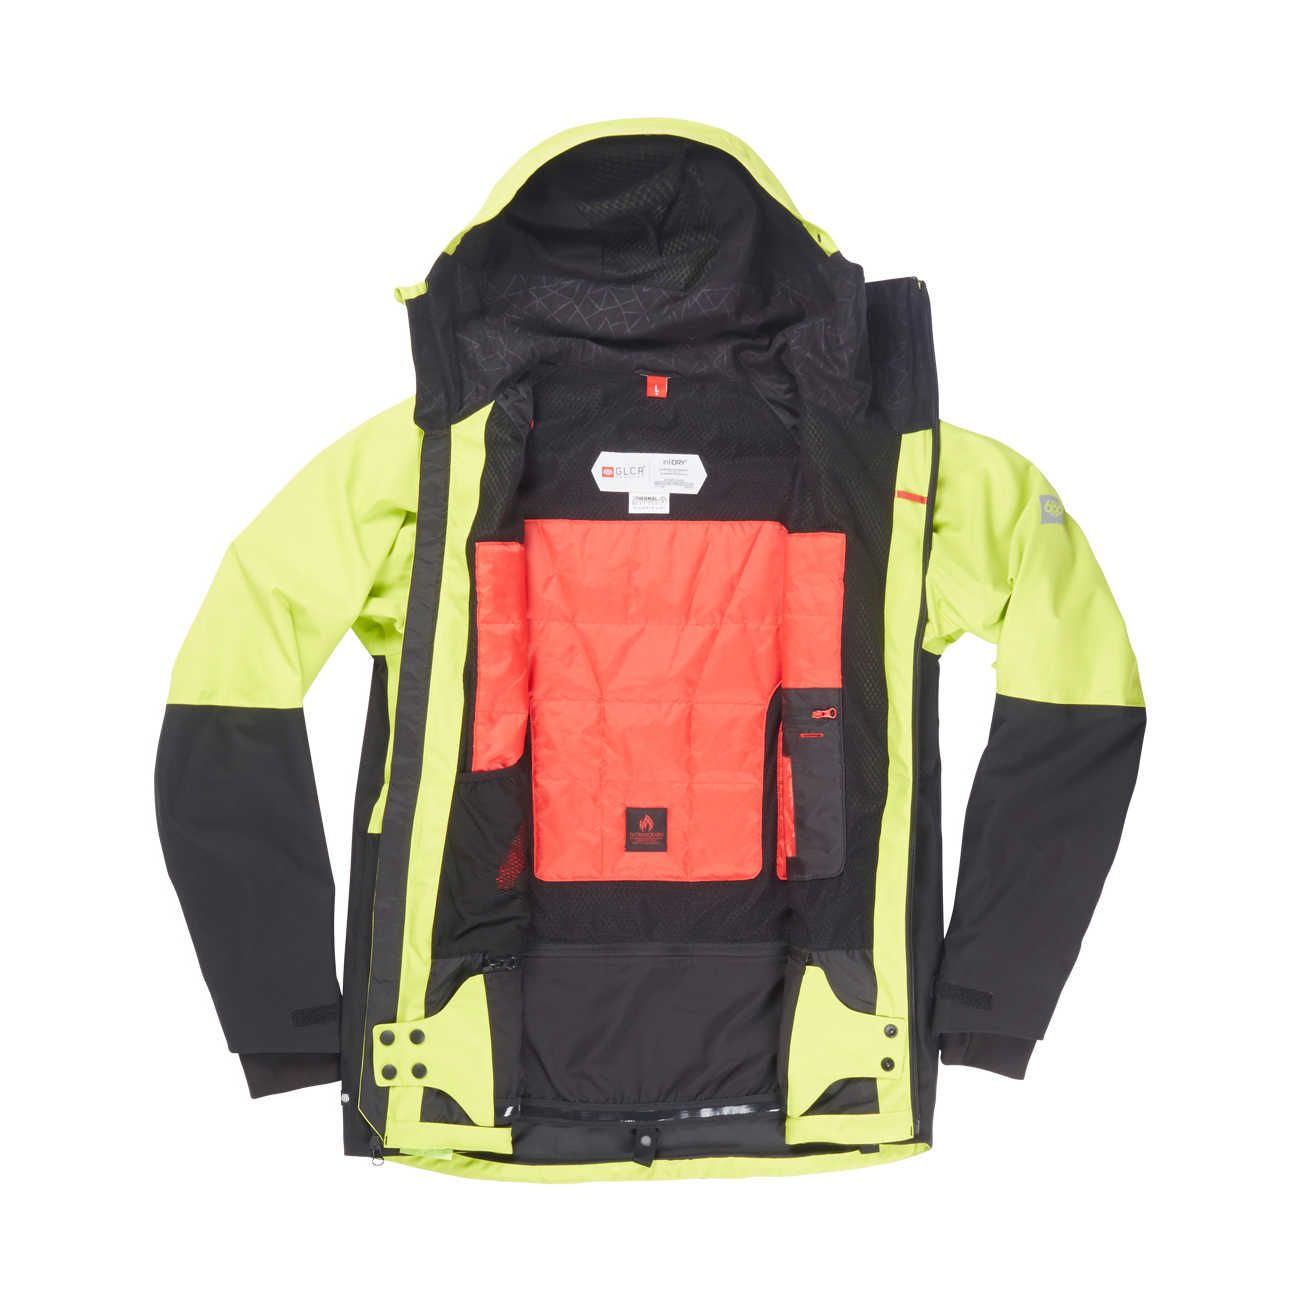 Veste de snowboard GLCR Hydra Thermagraph Jacket - Lime Twill Color Block